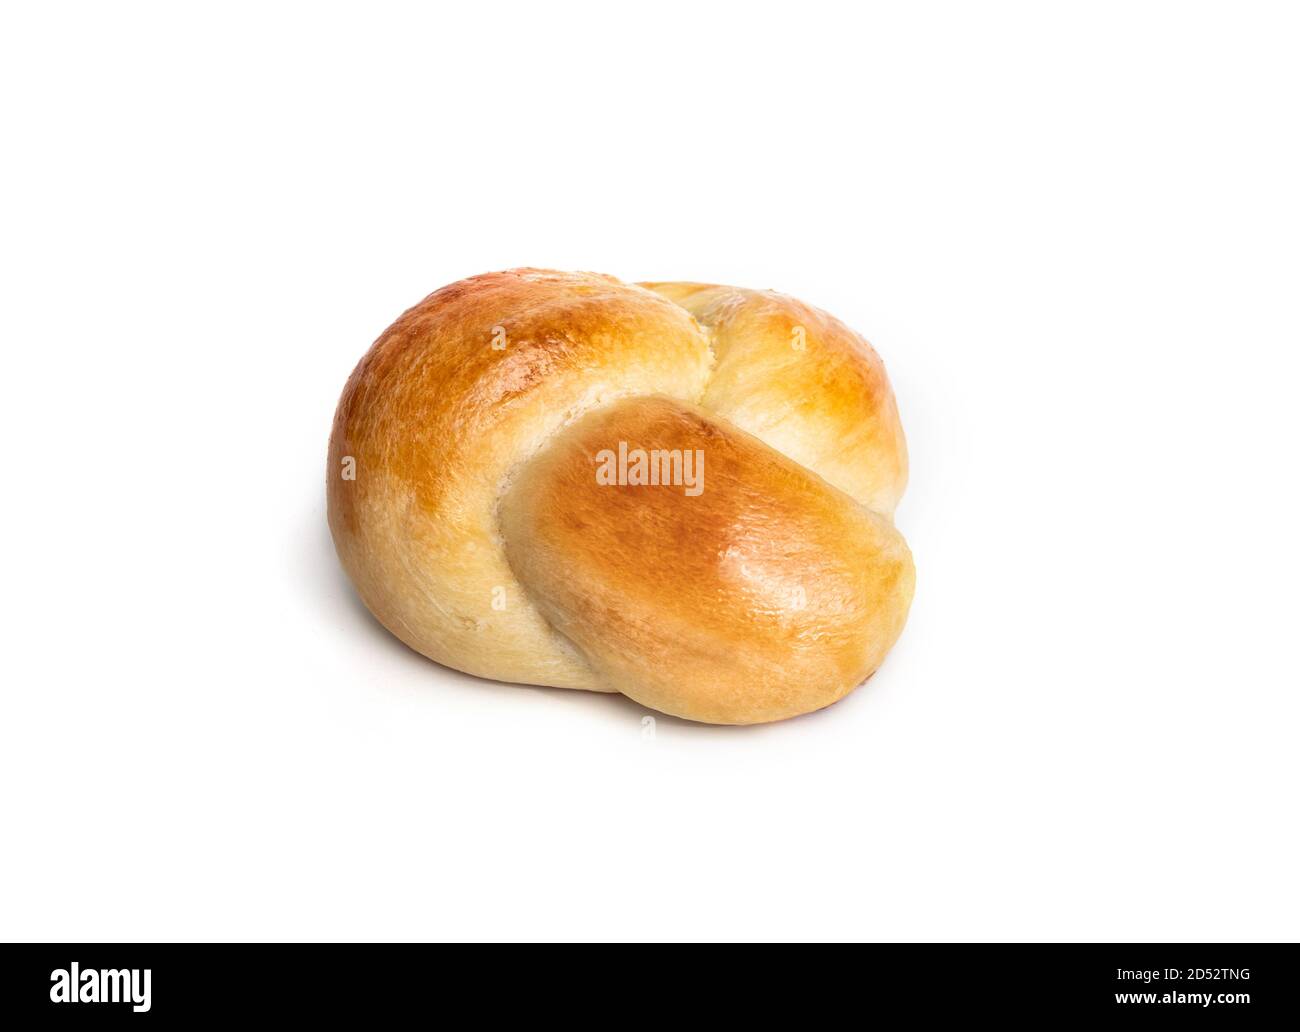 Single yeast bread bun in perspective view. One baked braided yeast knot roll with egg wash. Traditional Swiss butter bread called Zopf or Challah. Stock Photo